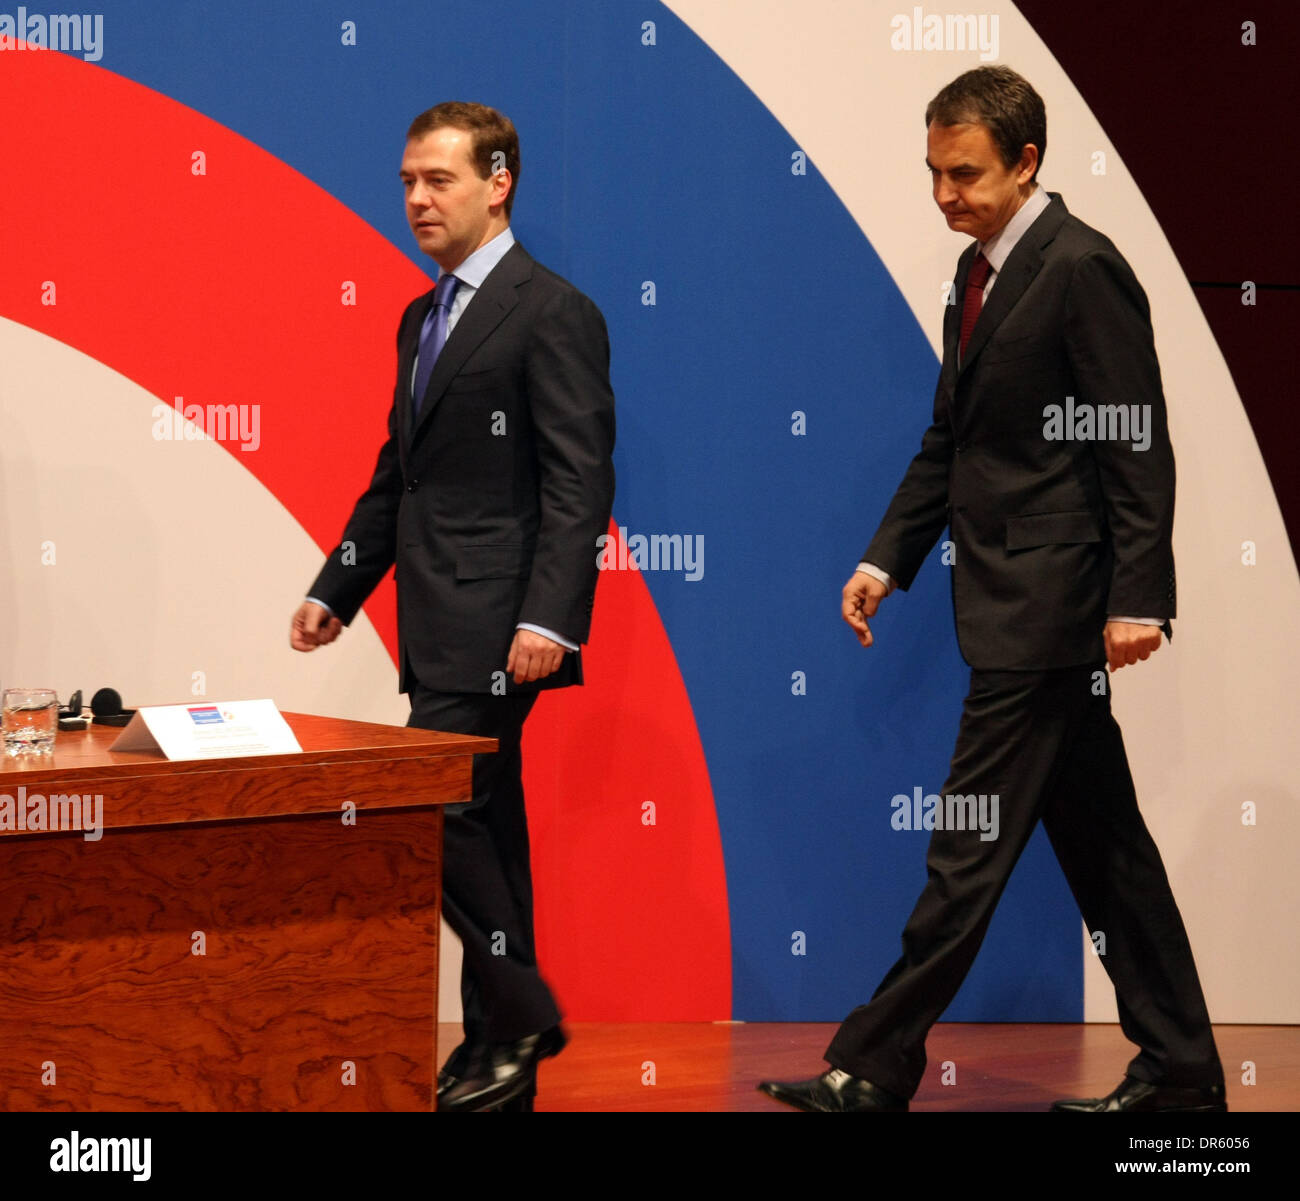 Mar 02, 2009 - Madrid, Spain - Russian President DMITRY MEDVEDEV (L) and Spanish Prime Minister LUIS RODRIGUEZ ZAPATERO at the Russia-Spain Forum in Madrid. (Credit Image: © PhotoXpress/ZUMA Press) RESTRICTIONS: * North and South America Rights Only * Stock Photo